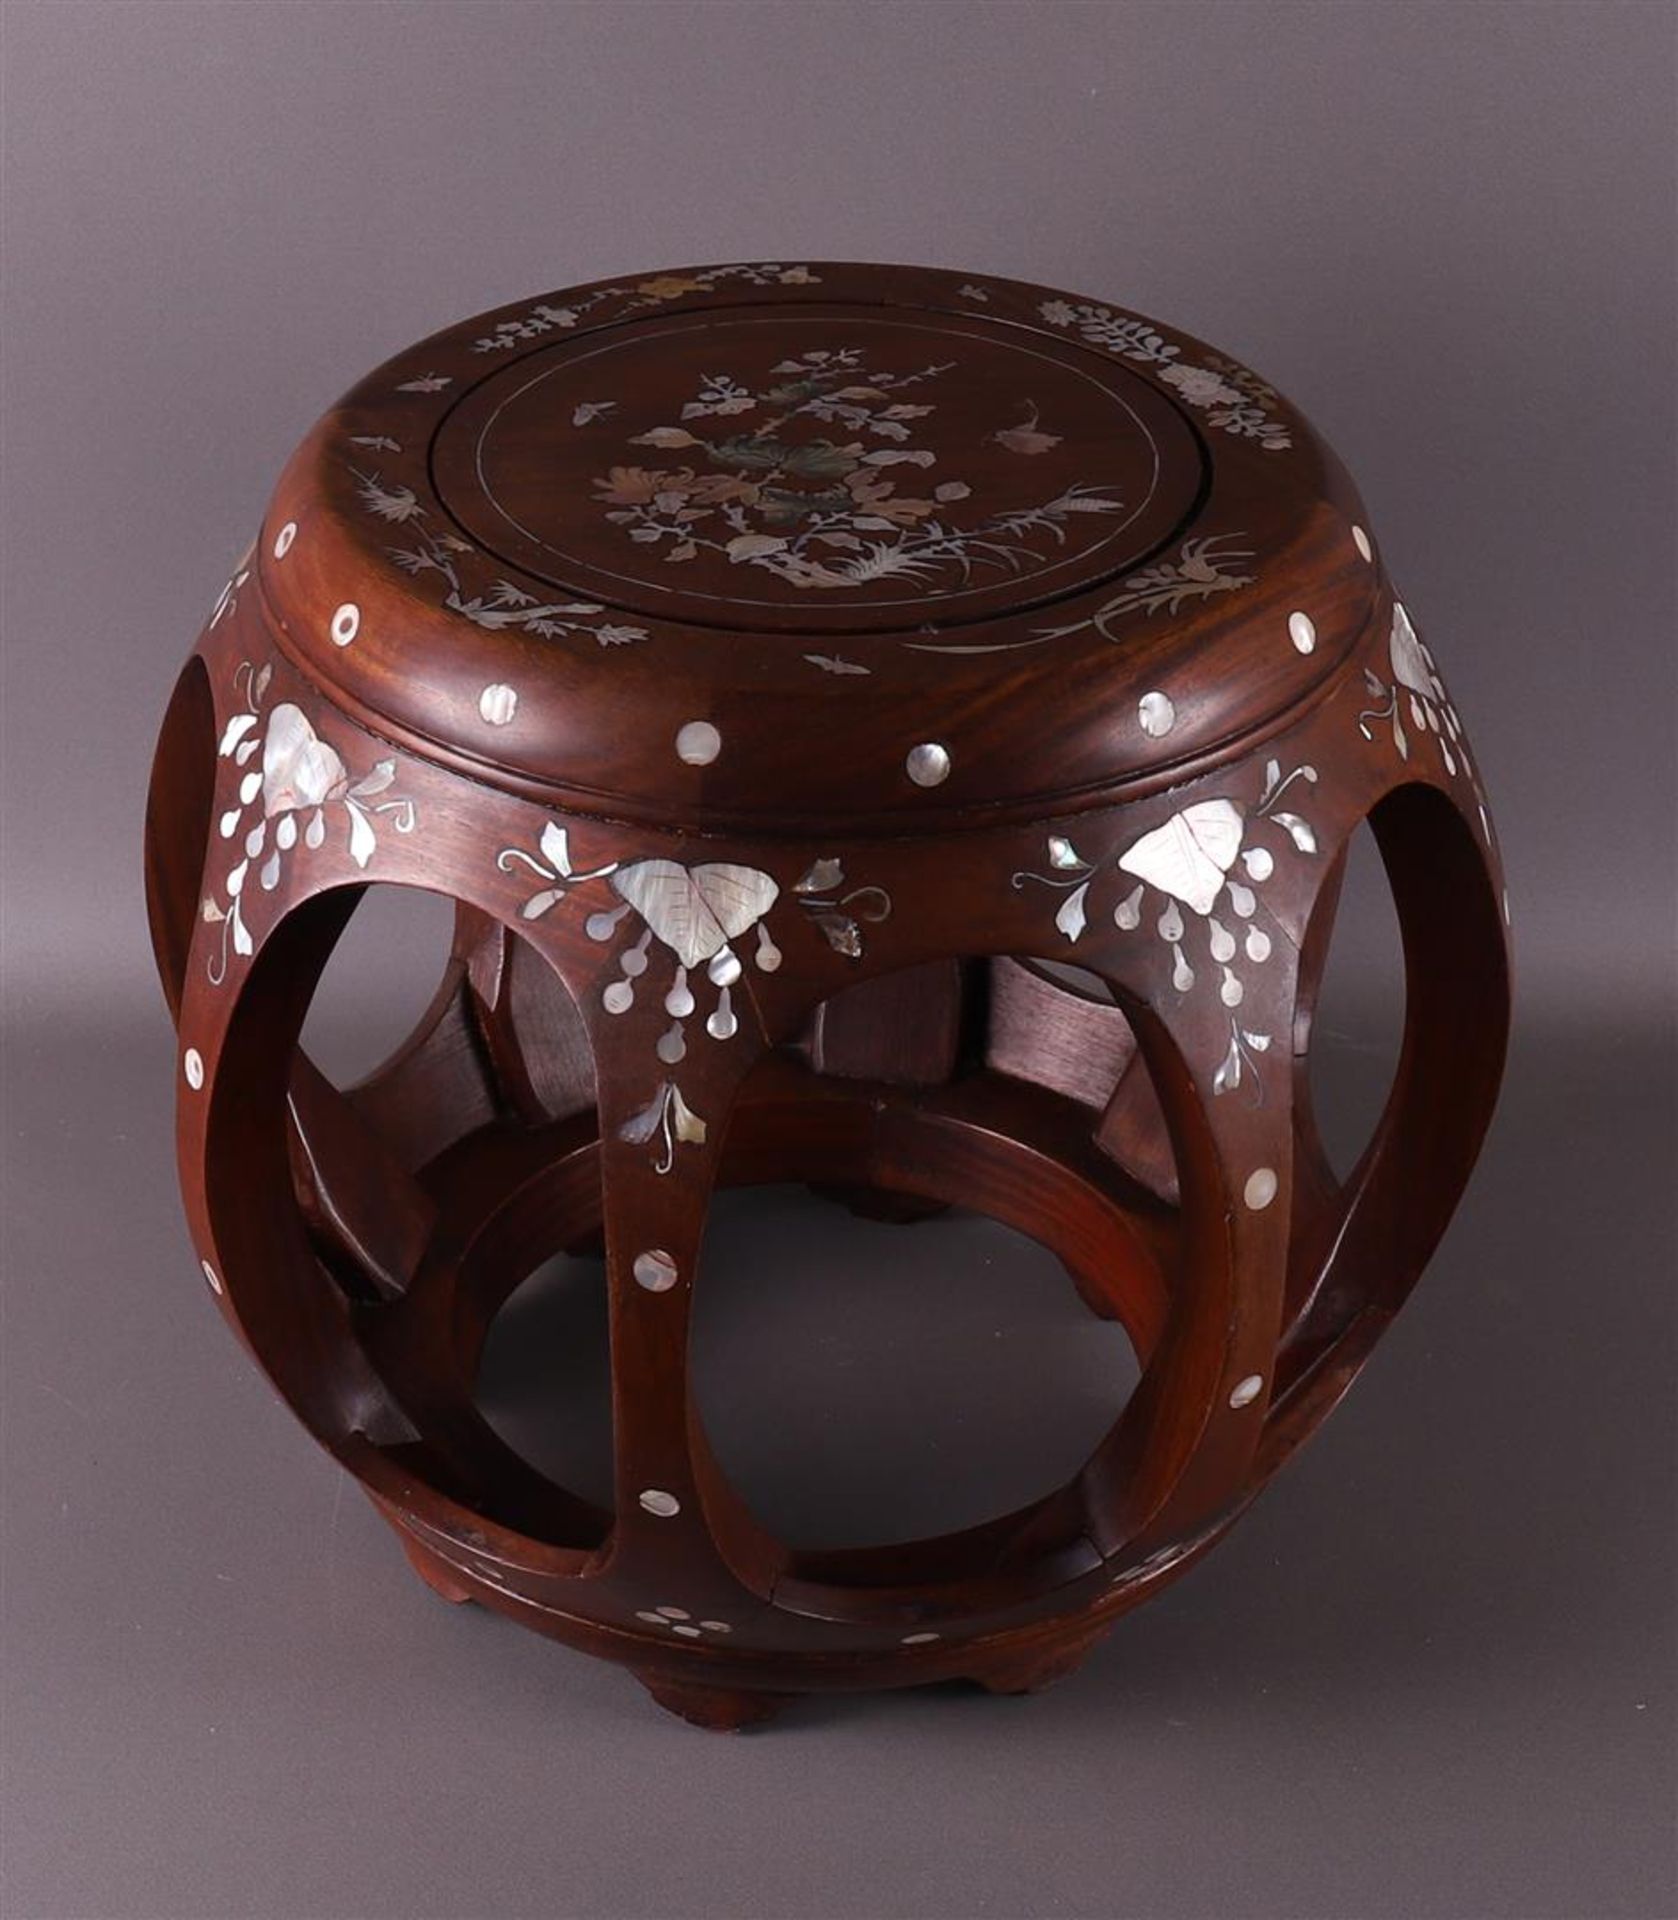 A tropical wooden footstool, China, 2nd half of the 20th century.